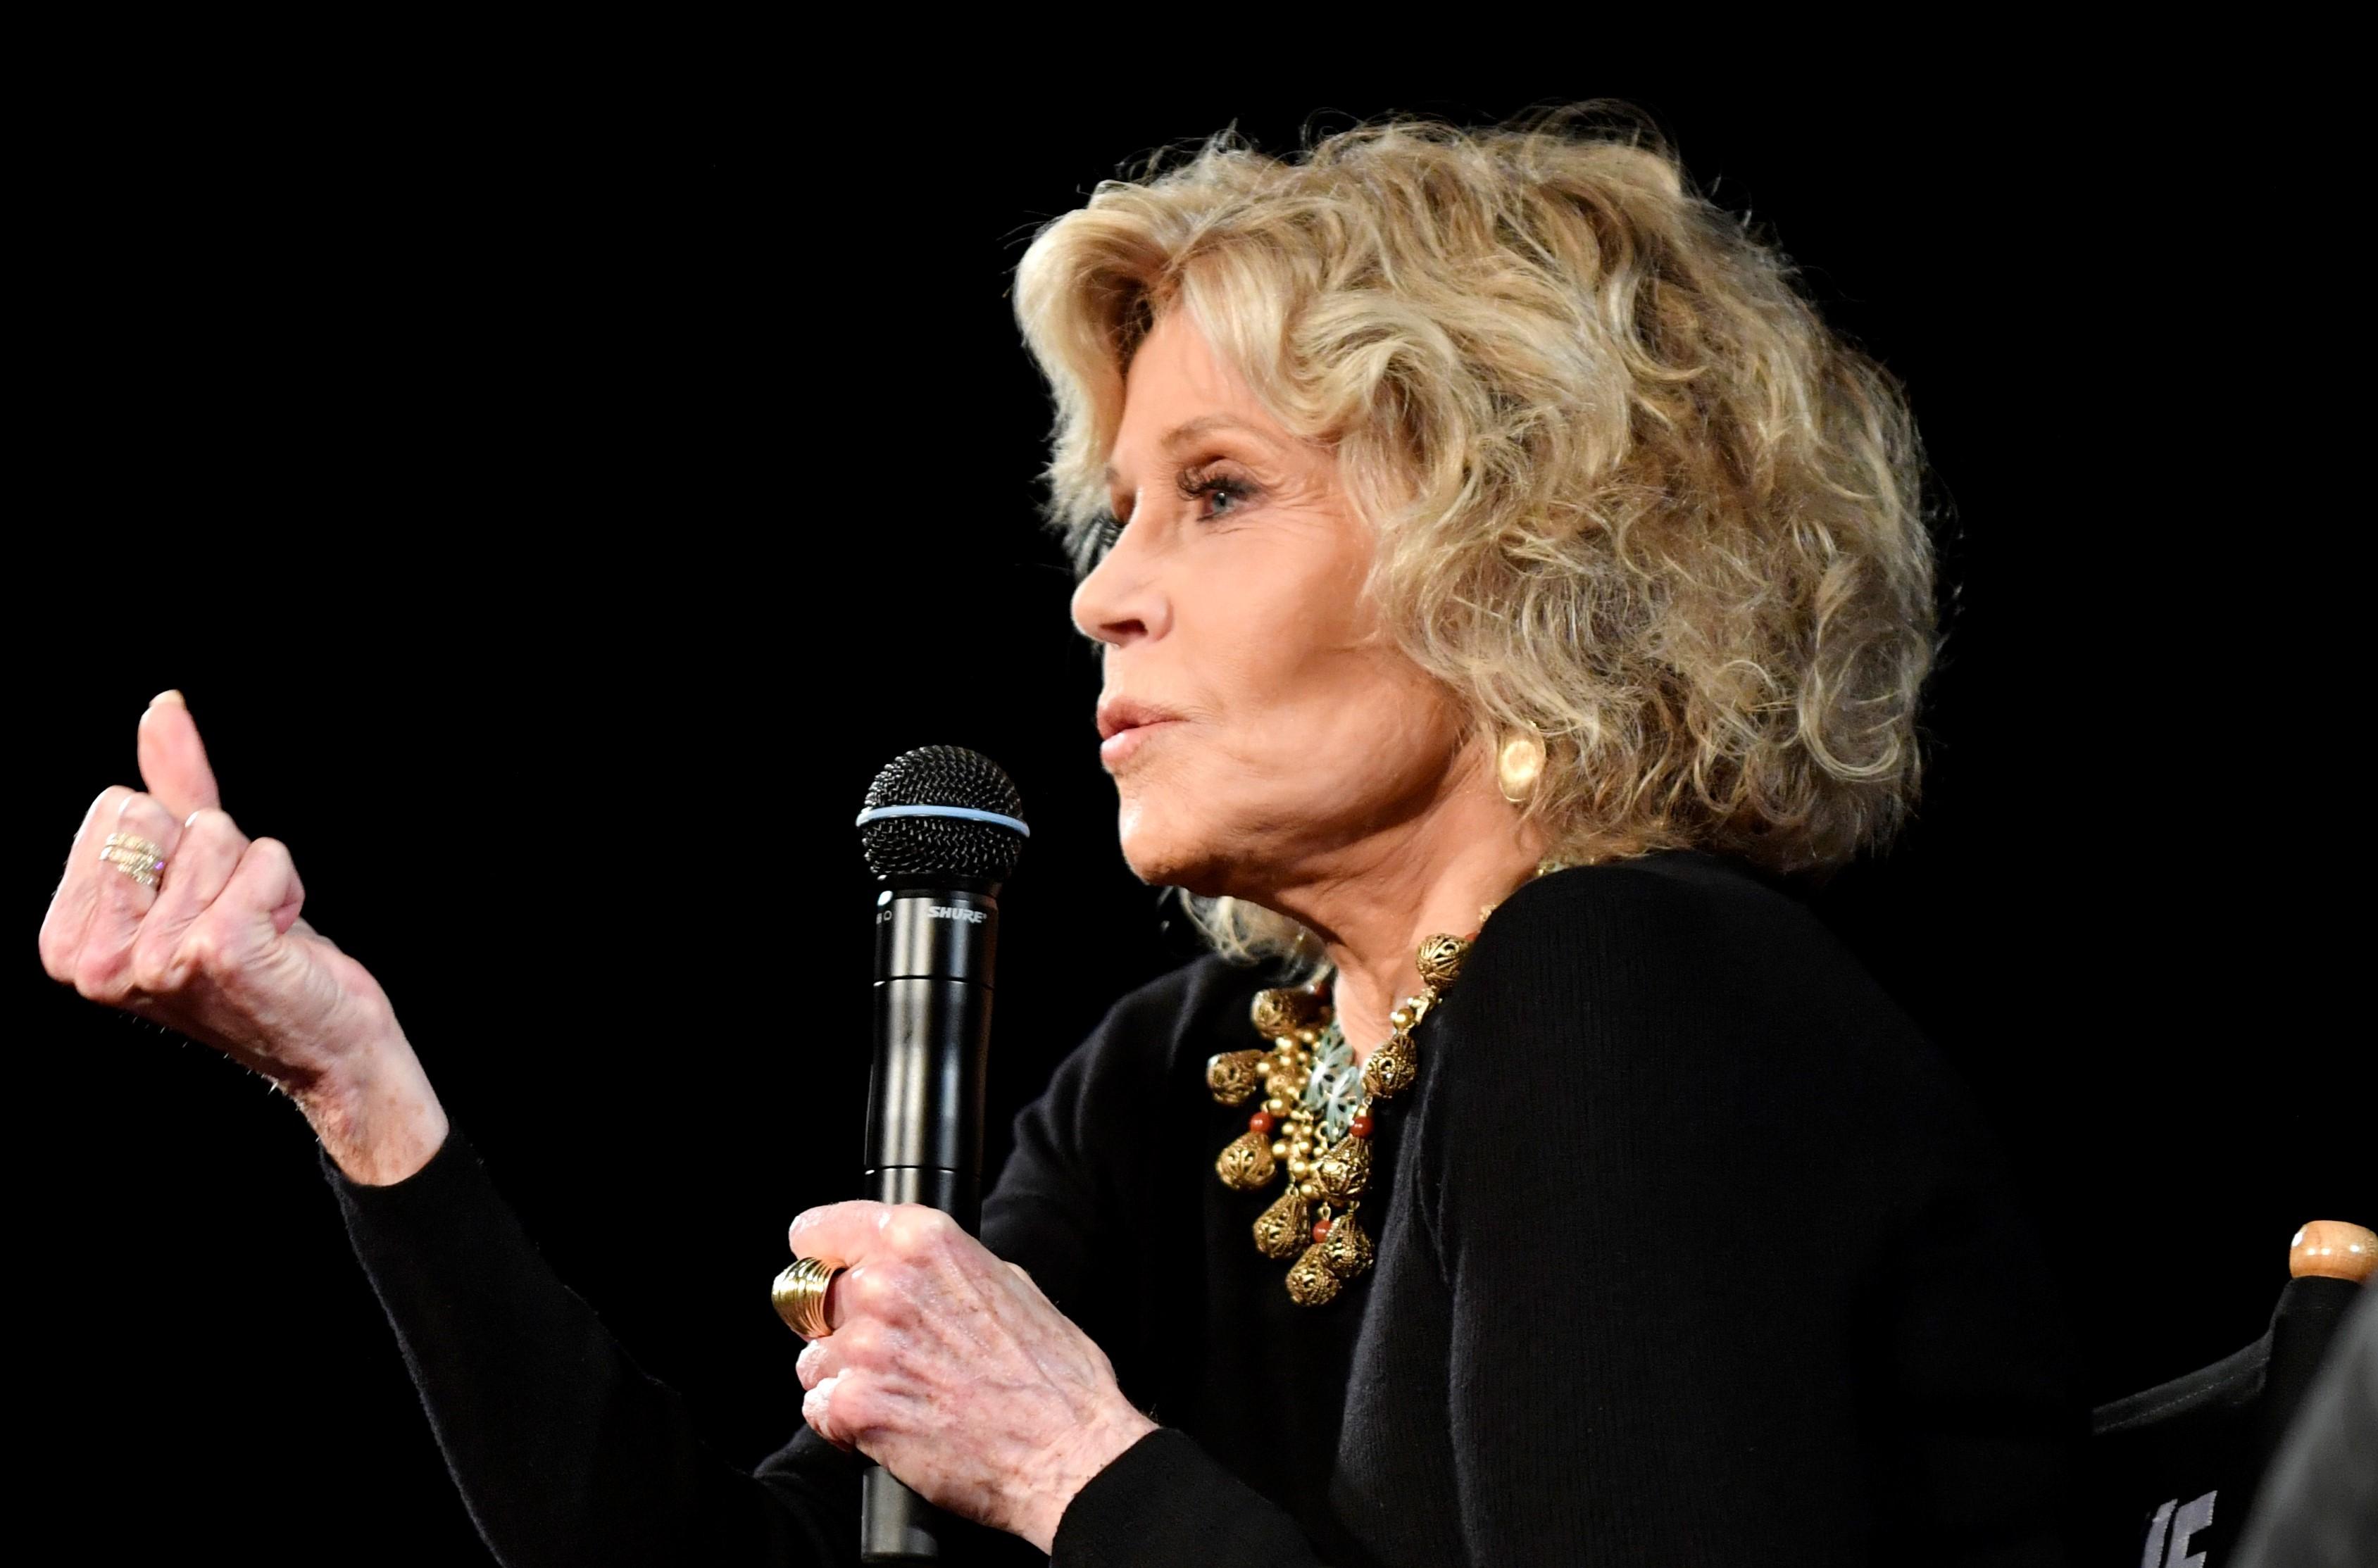 Kering Women In Motion Master Class With Jane Fonda At La Cinematheque Francaise.JPG